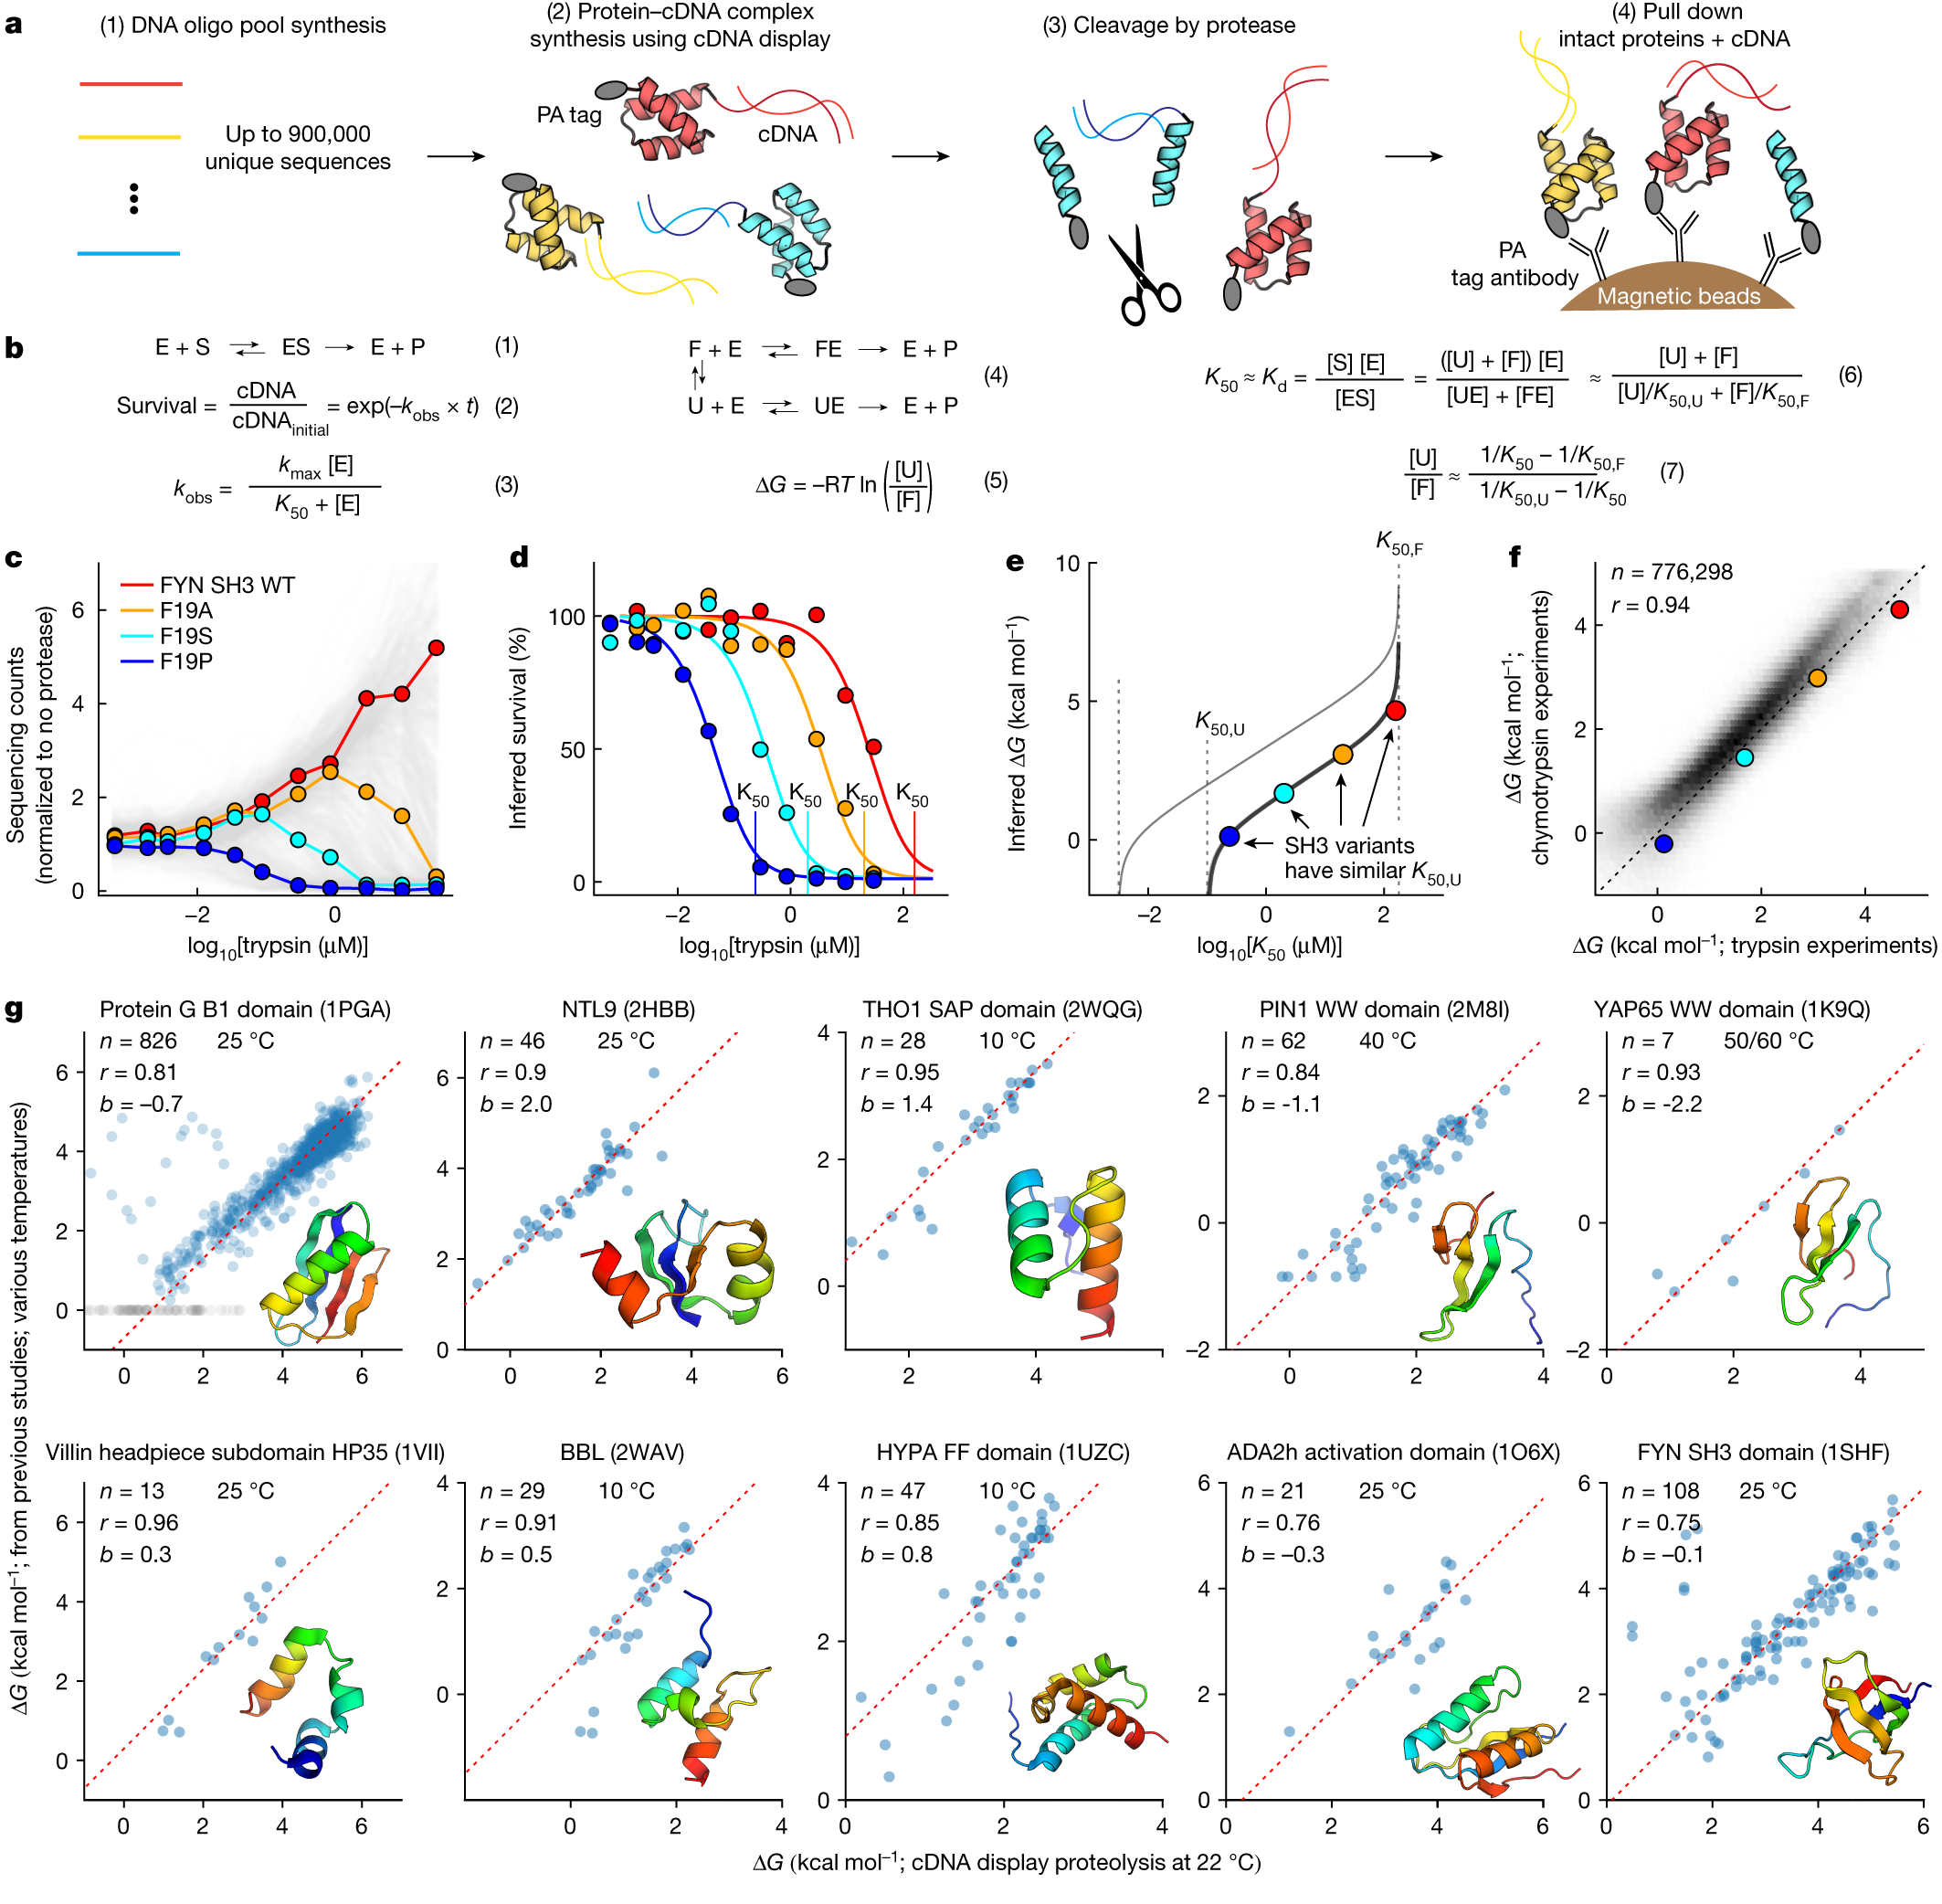 Mega-scale experimental analysis of protein folding stability in biology  and design